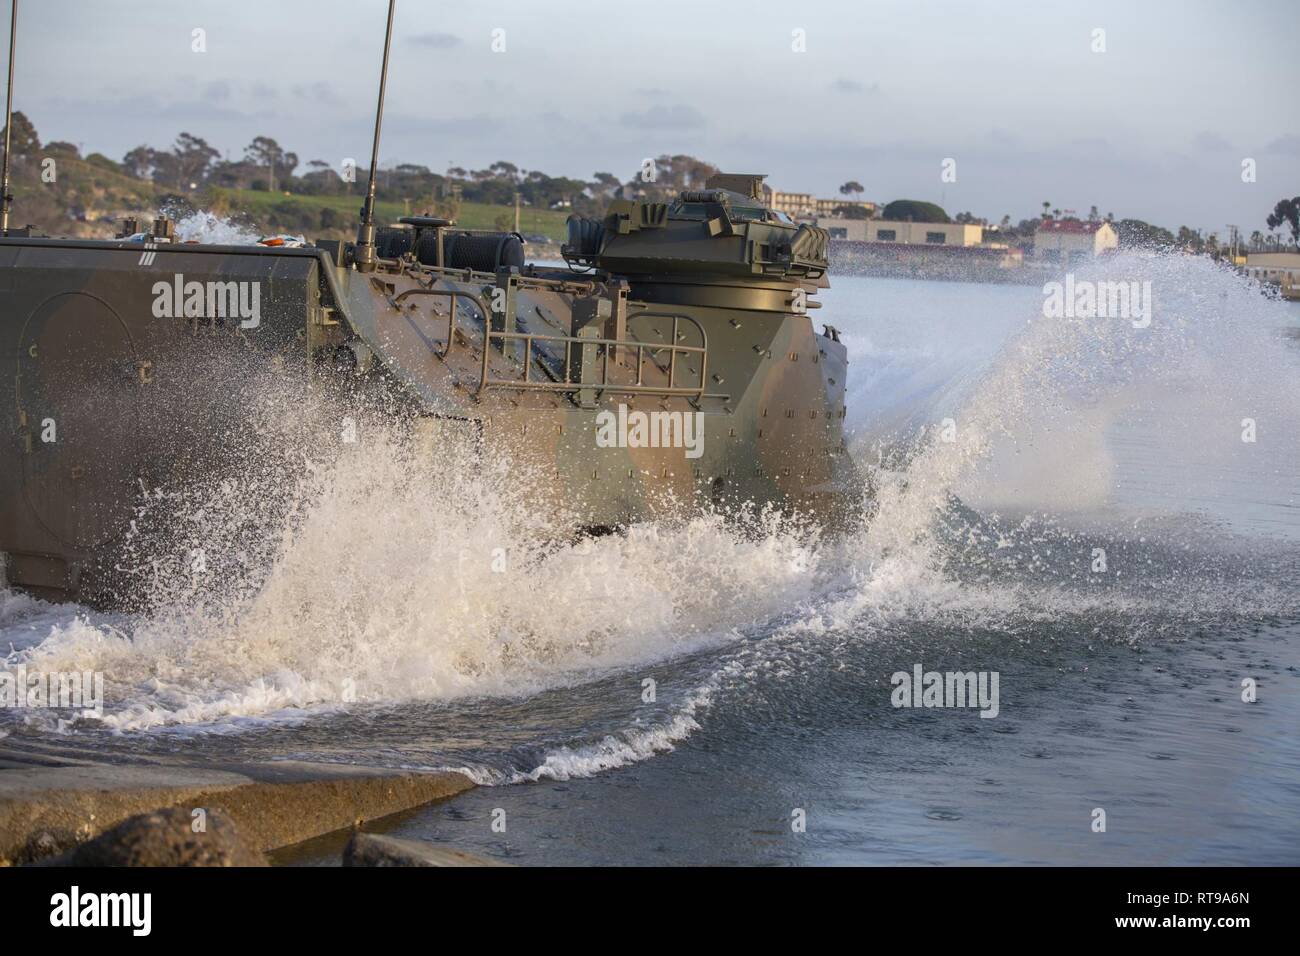 A Japan Ground Self-Defense Force assault amphibious vehicle enters the water and travels to the USS Somerset (LPD 25) during Iron Fist 2019, Jan. 30 on U.S. Marine Corps Base Camp Pendleton, CA. Exercise Iron Fist is an annual, multilateral training exercise where U.S. and Japanese service members train together and share techniques, tactics and procedures to improve their combined operational capabilities. Stock Photo